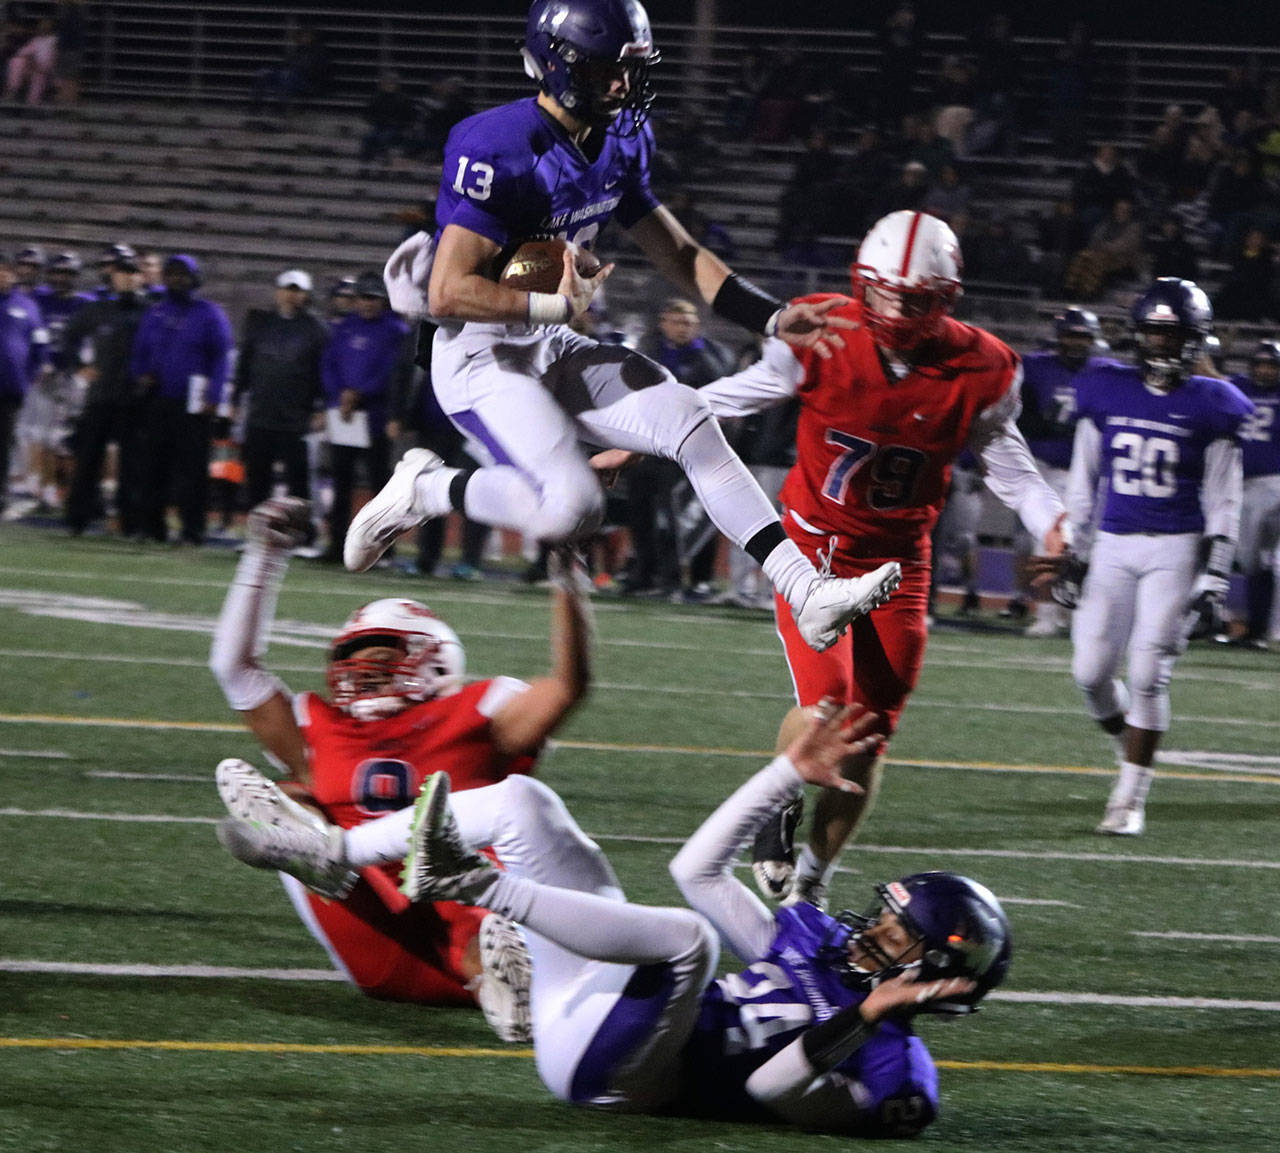 Lake Washington’s Jakson Voelker leaps into the end zone. Andy Nystrom/ staff photo